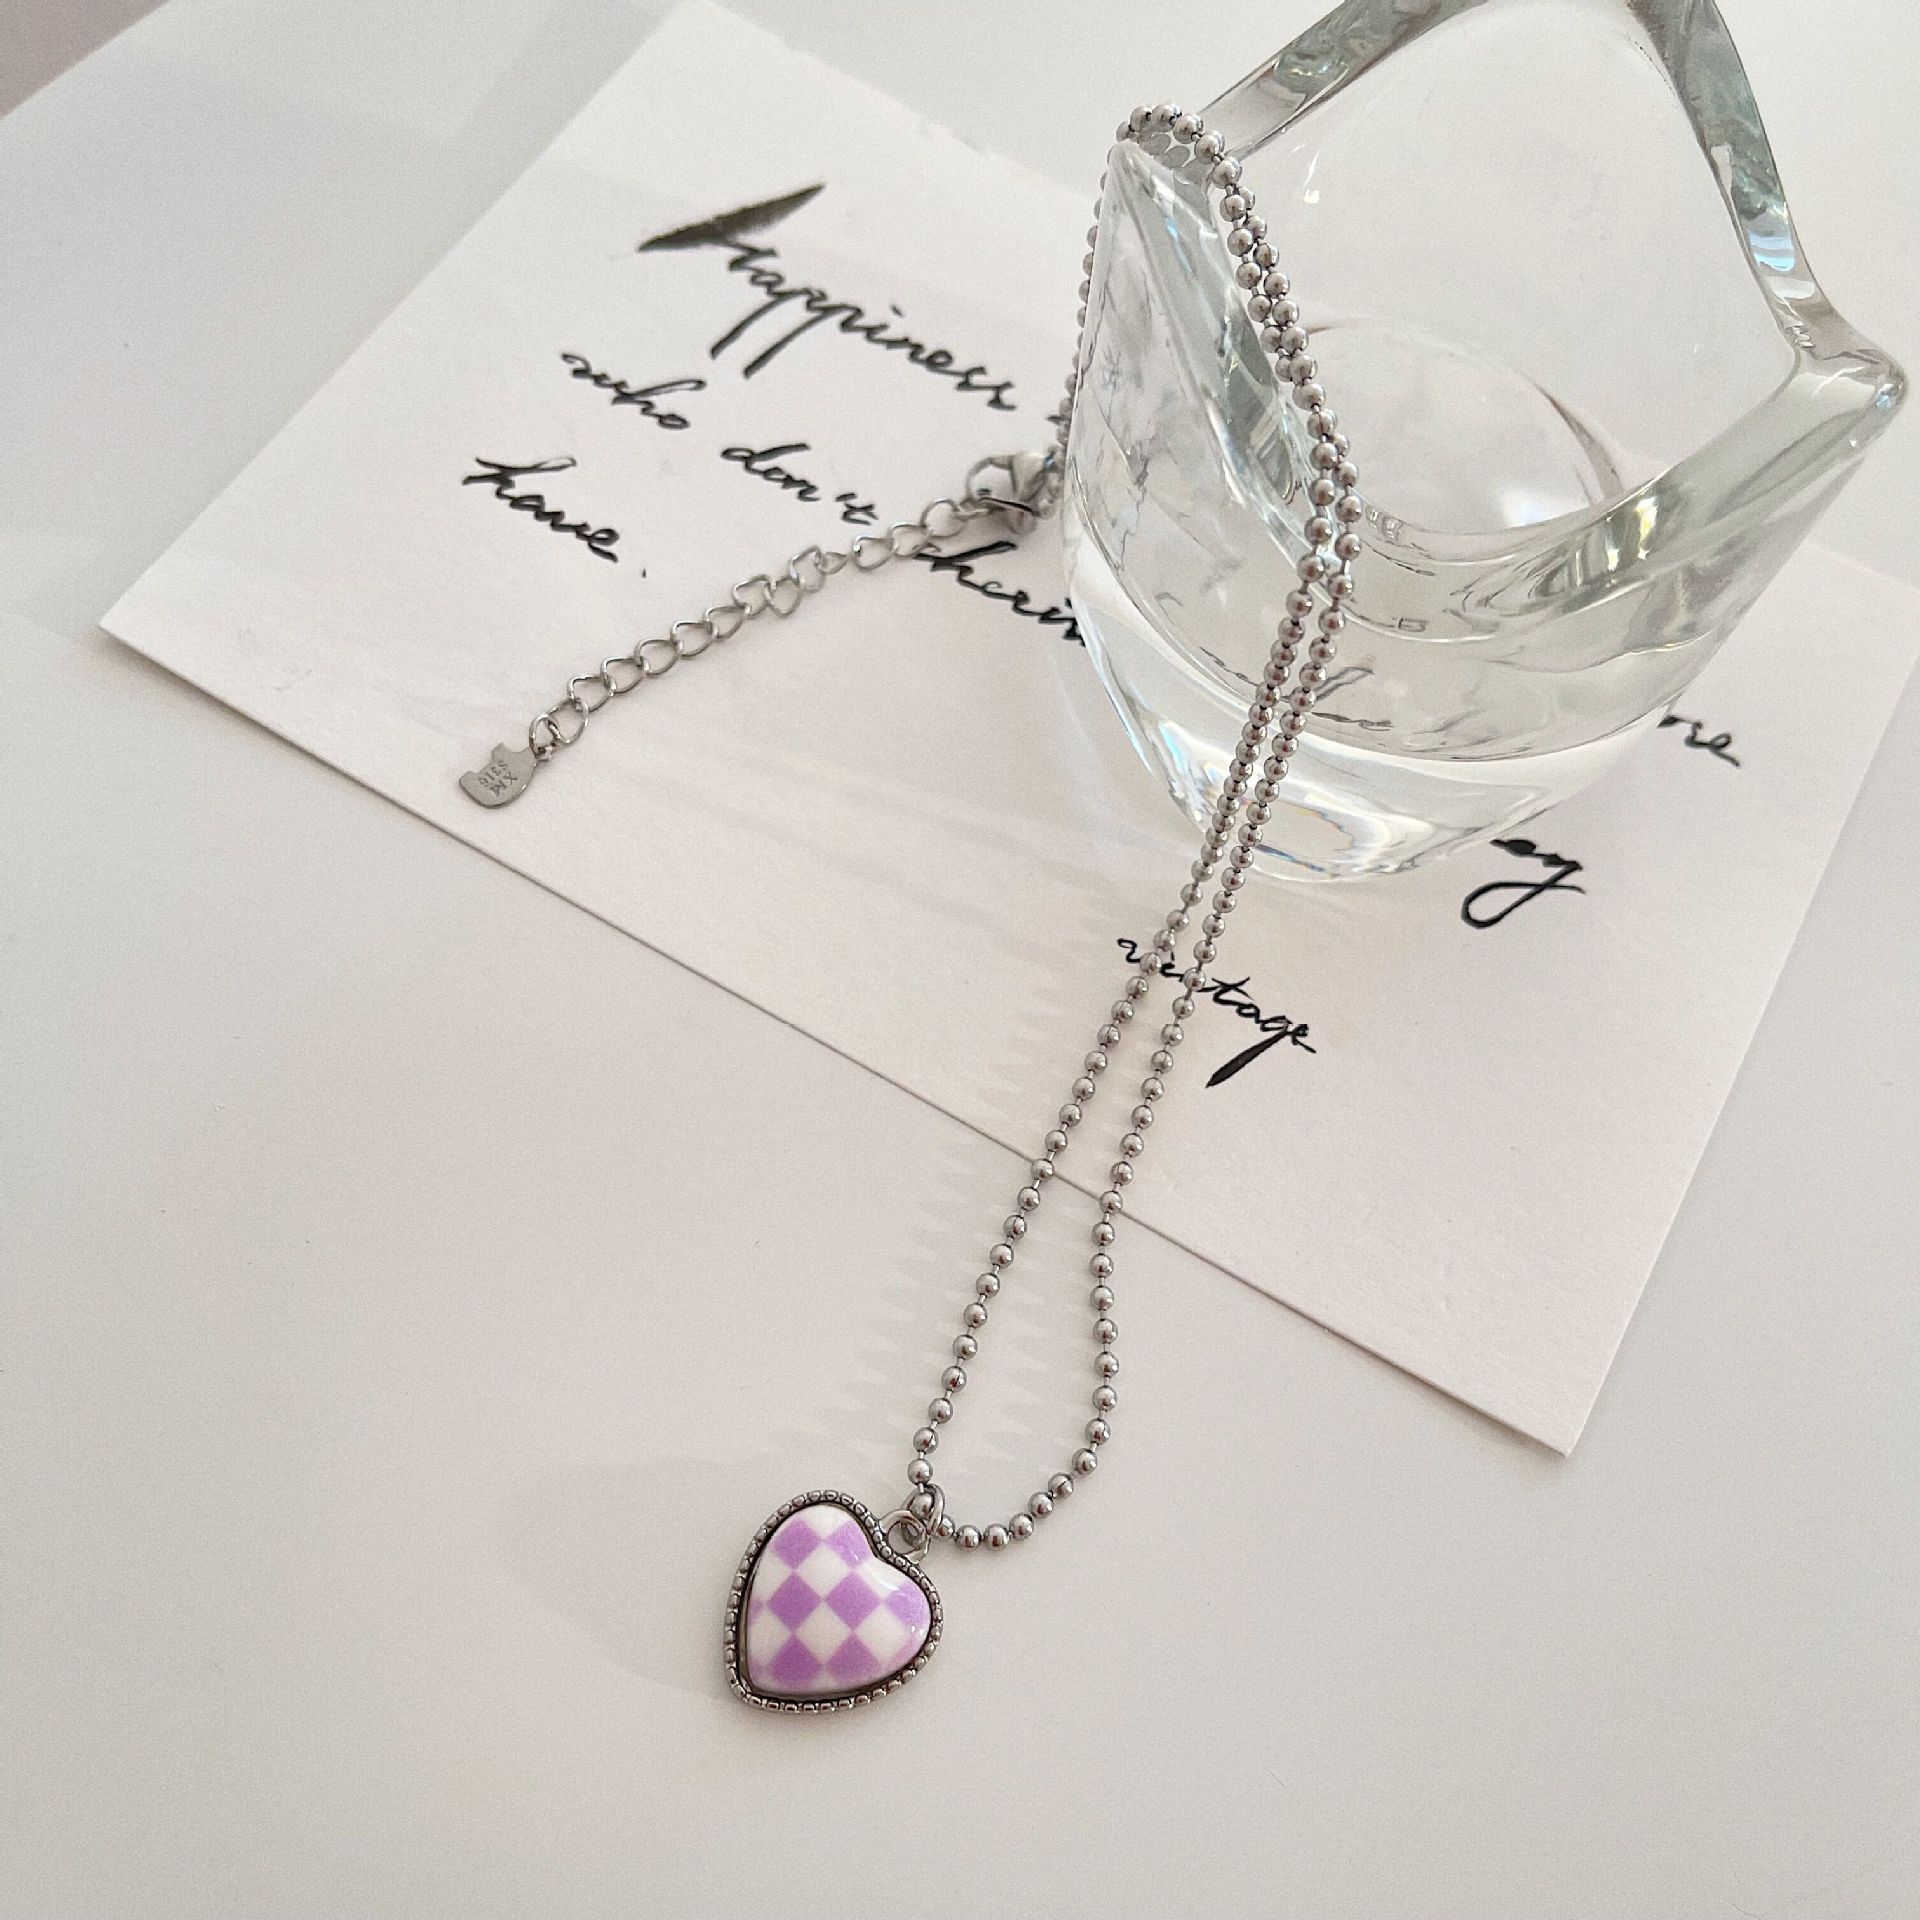 PLAID HEART NECKLACE - STAY FANCY